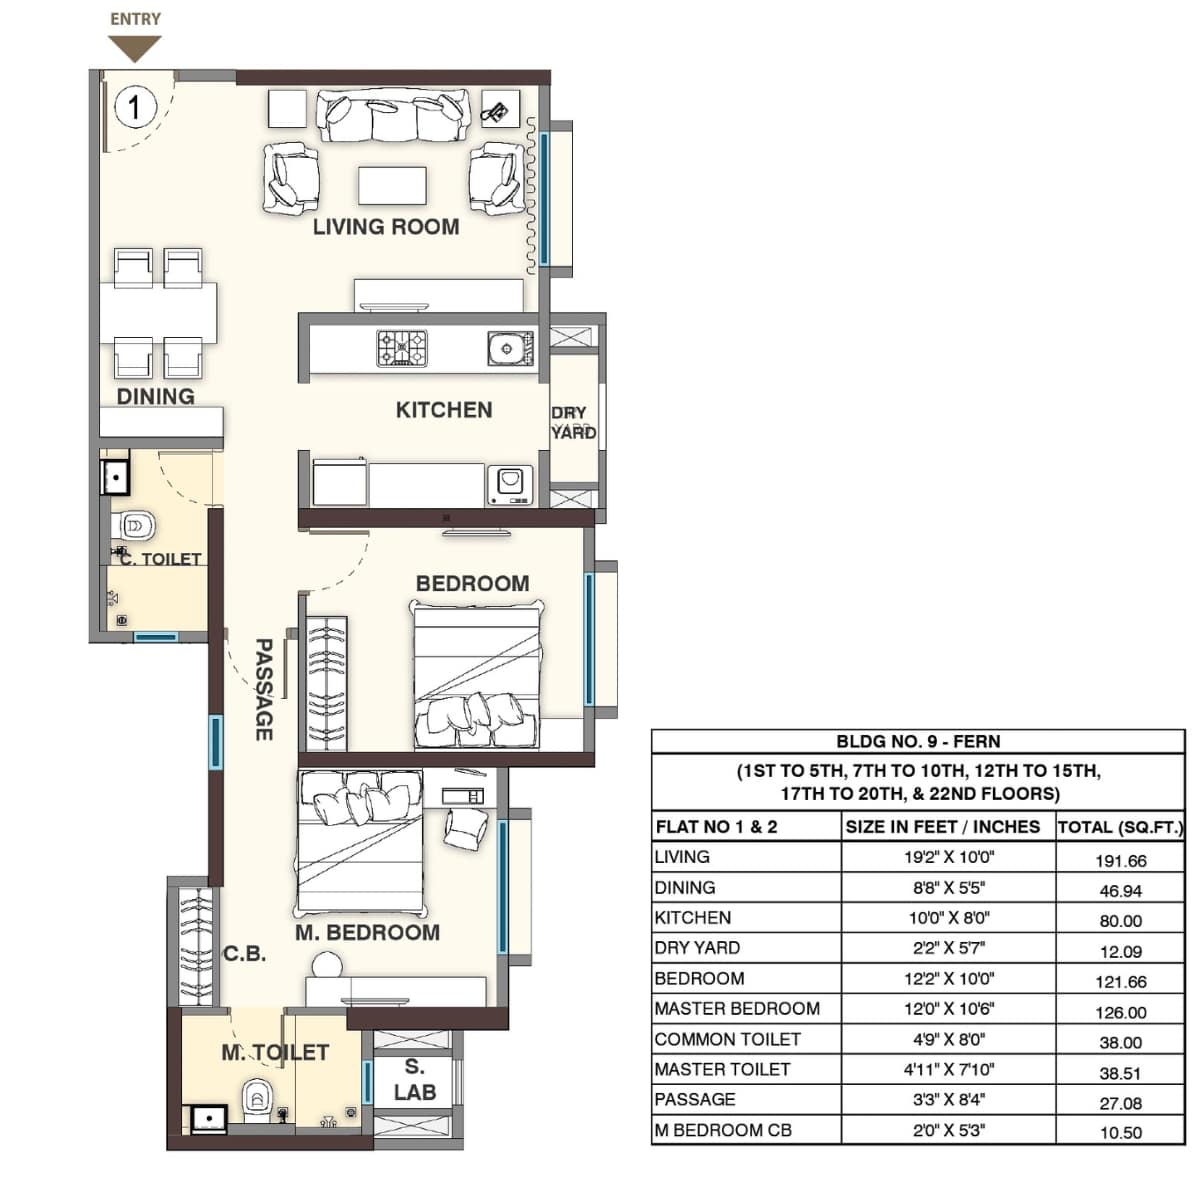 Sheth-Vasant-Lawns-Floor-Plan-Fern-2-BHK-Unit-1-1st-to-5th-7th-to-10th-12th-to-15th-17th-to-22nd